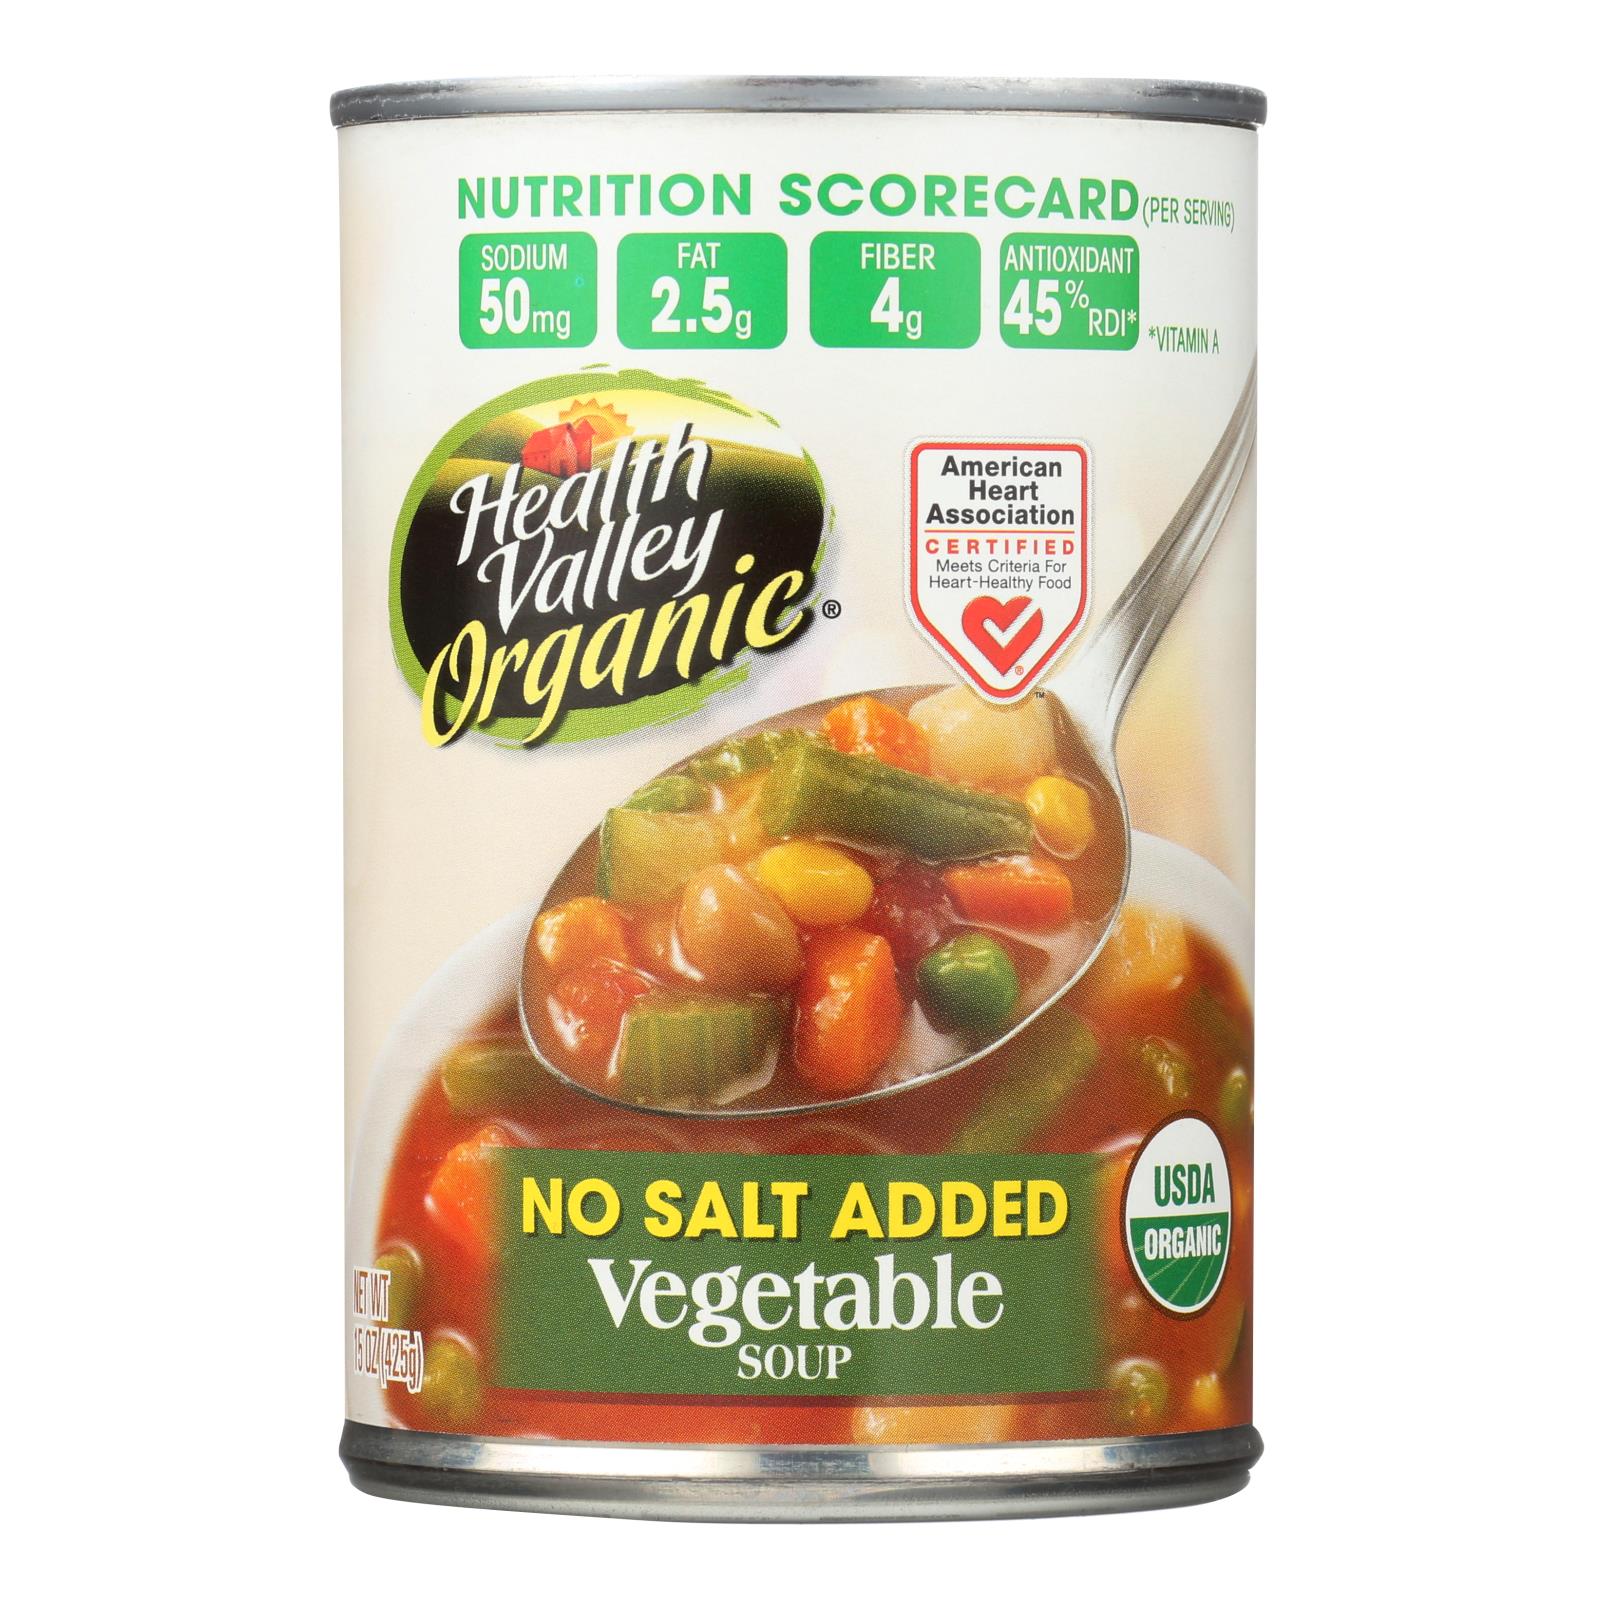 Health Valley Organic Soup